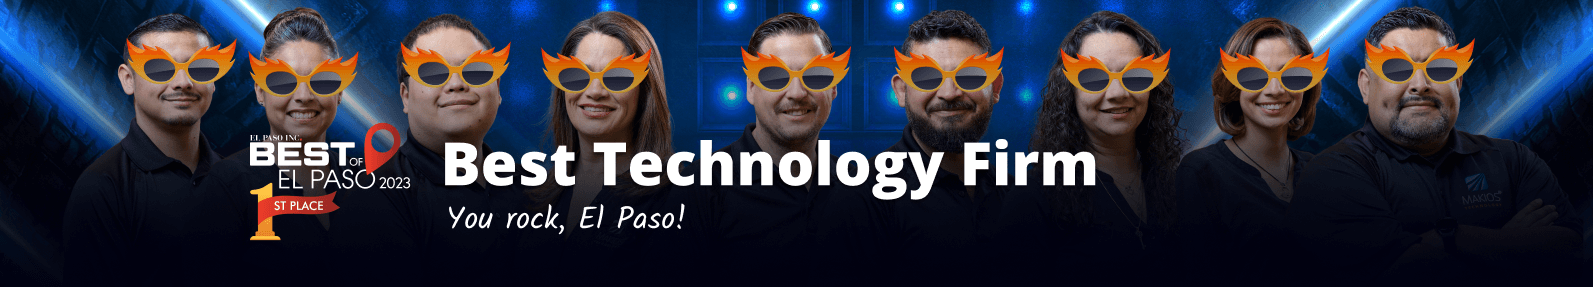 Makios Best Technology Firm in El Paso banner